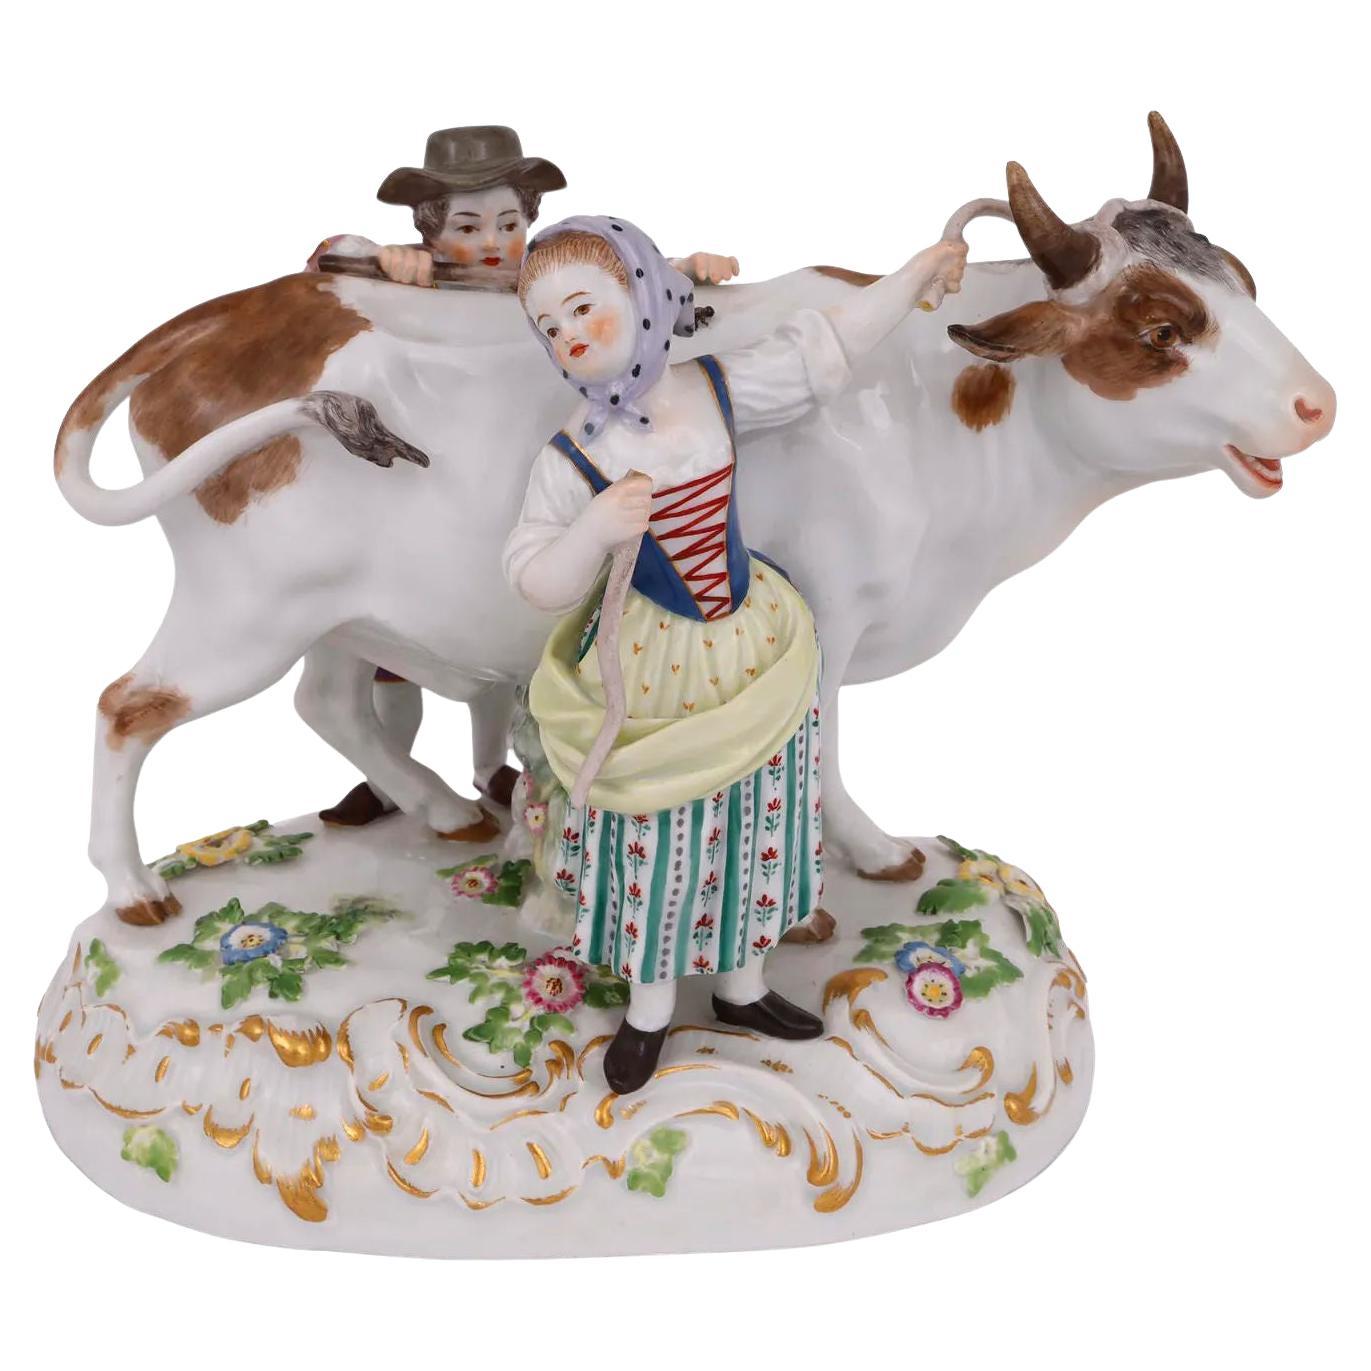 Meissen Porcelain Figurine of Bull with Boy and Girl